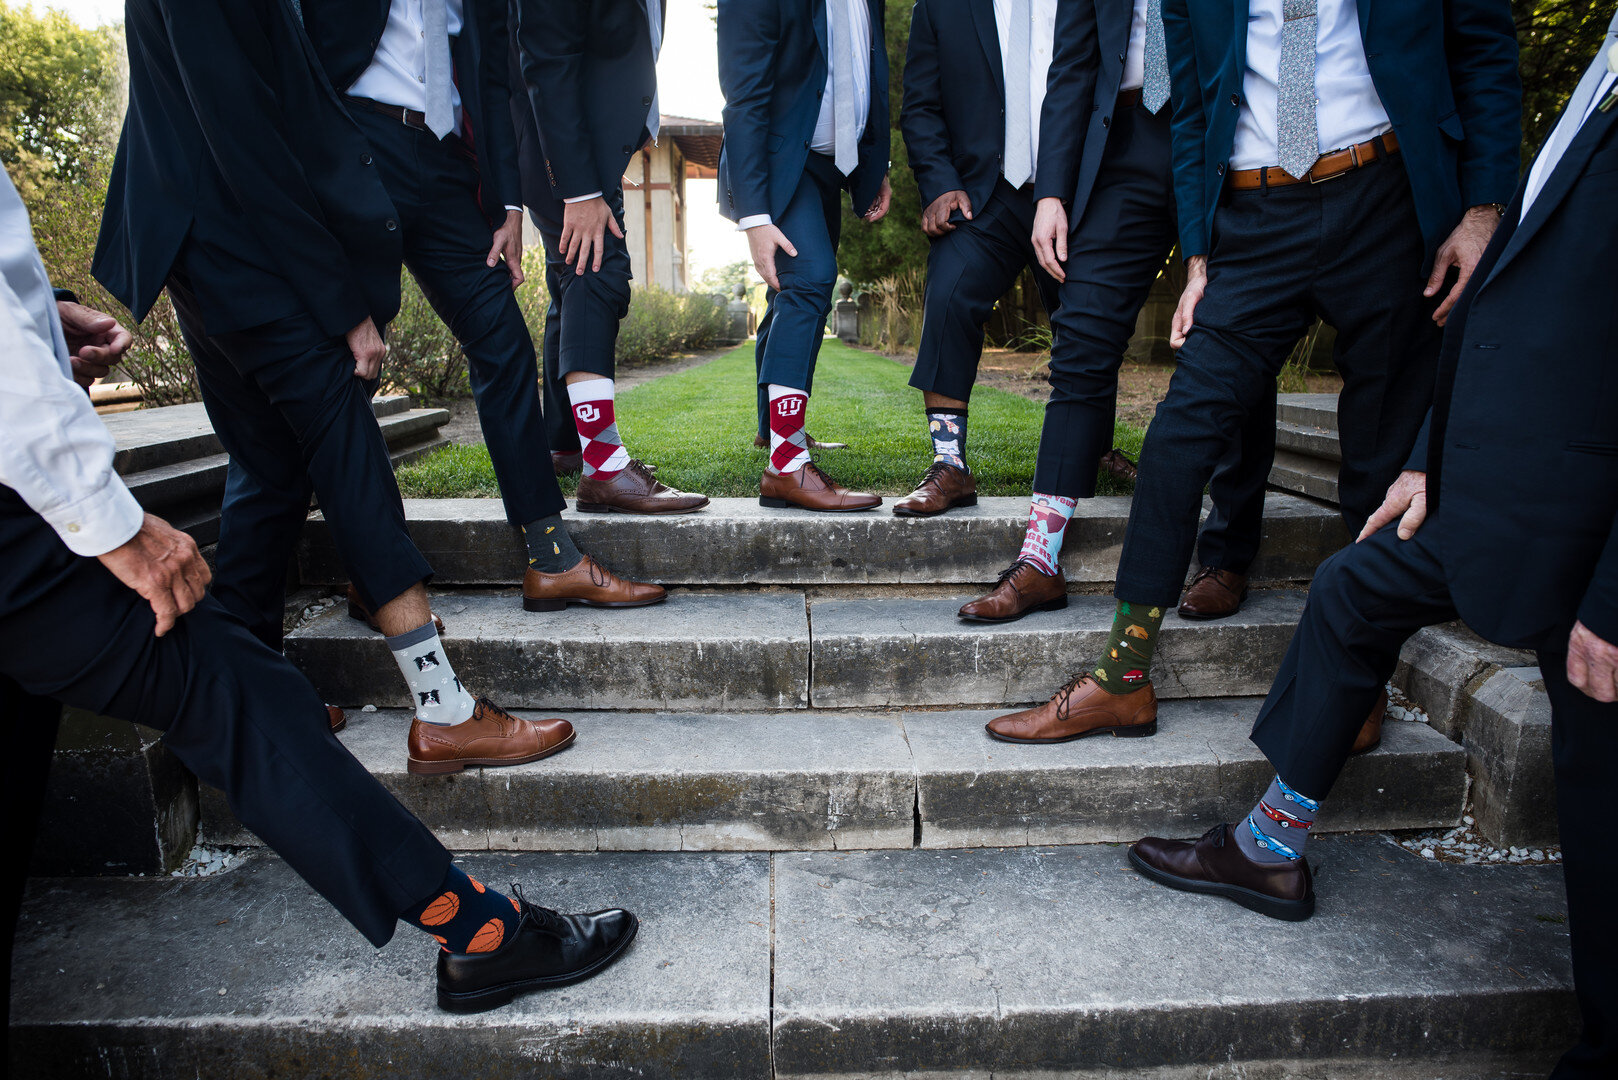 Groomsmen socks: Golden Hour Armour House Chicago Wedding captured by Inspired Eye Photography featured on CHI thee WED. Find more wedding ideas at CHItheeWED.com!